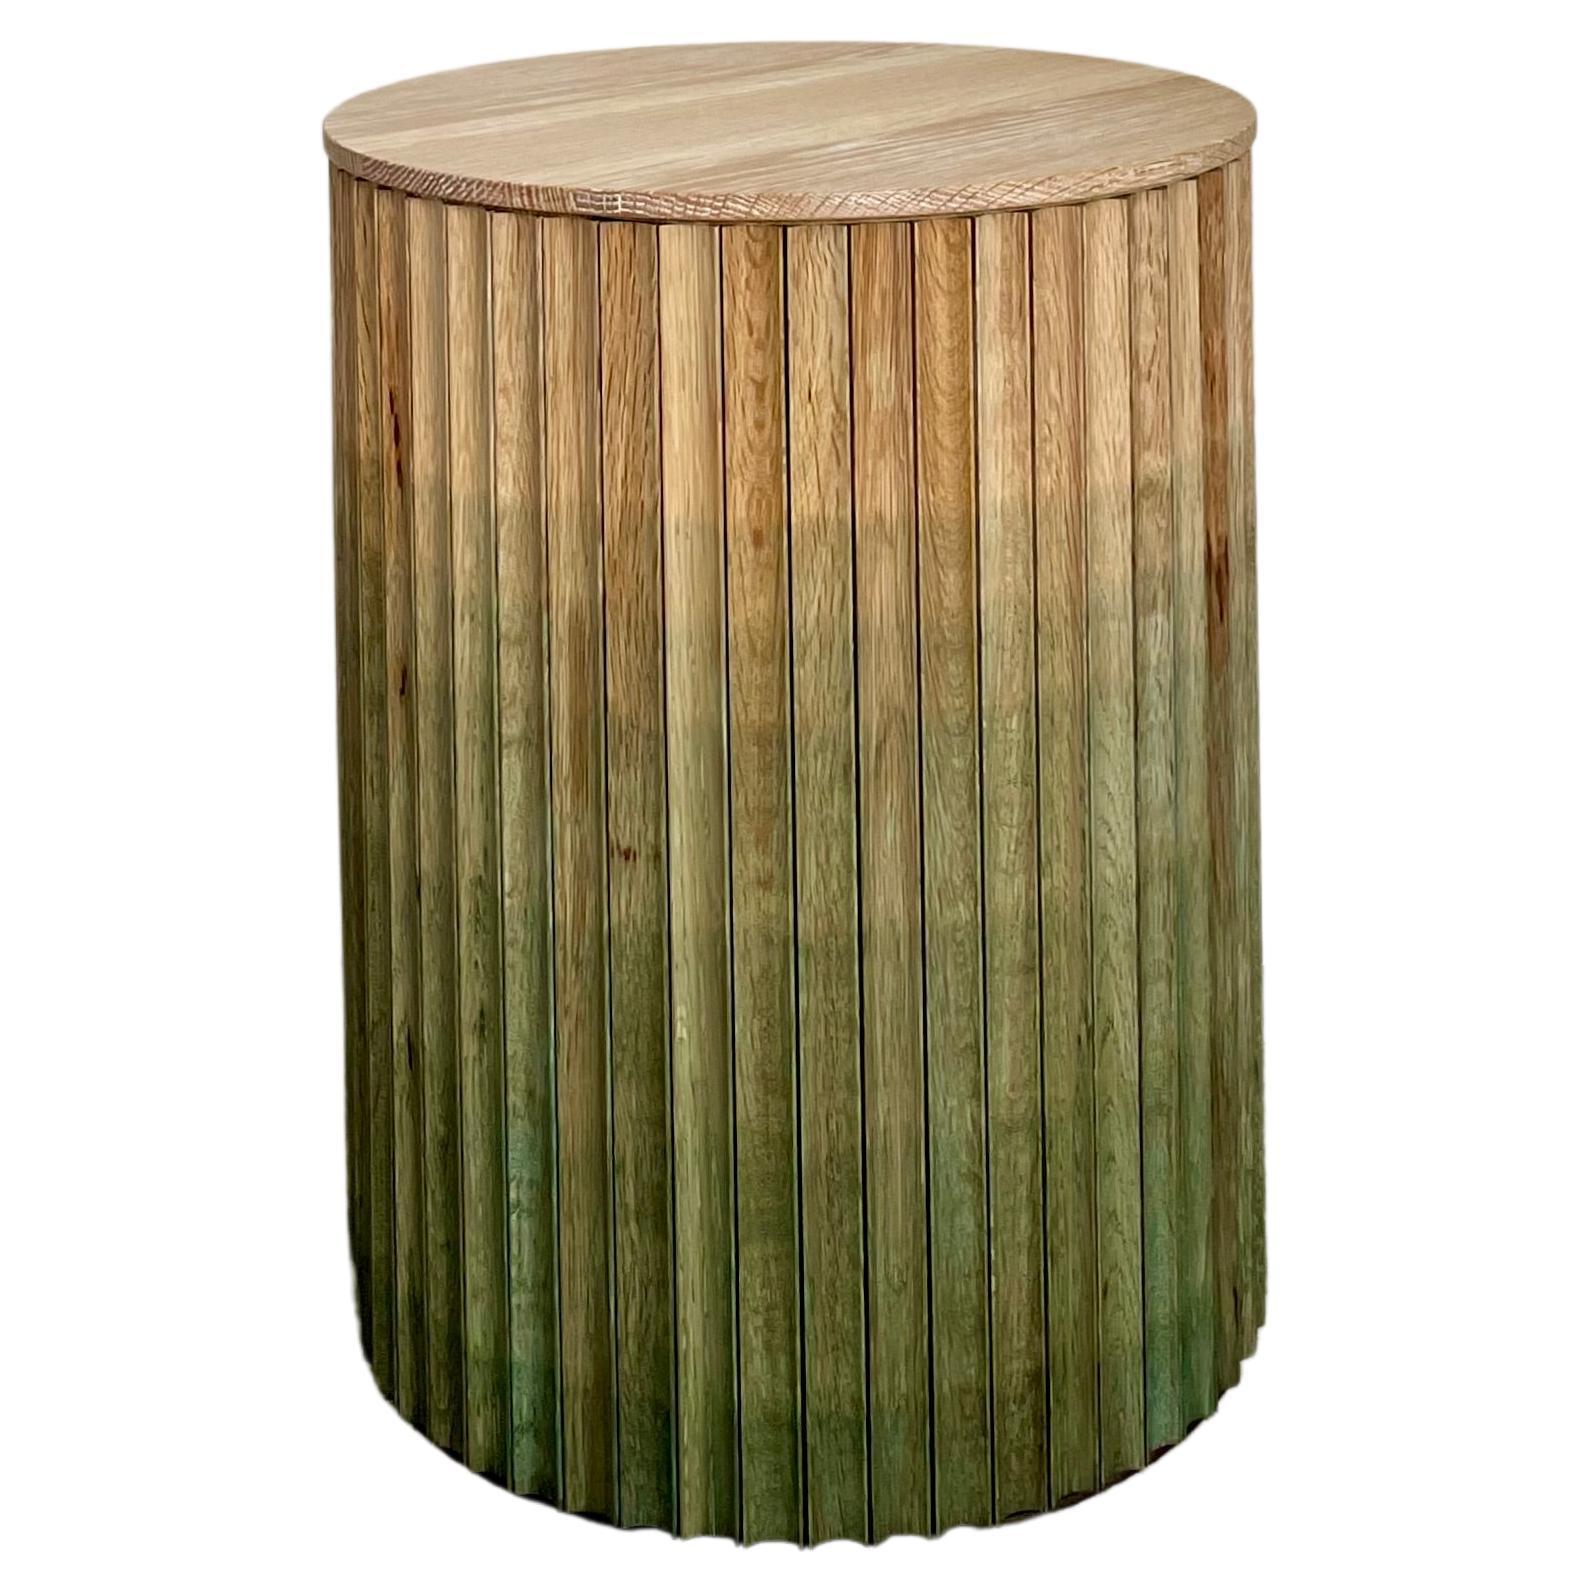 Pilar Tables - Set of 3 / Celadon Green Ombré on Maple Wood by INDO- For Sale